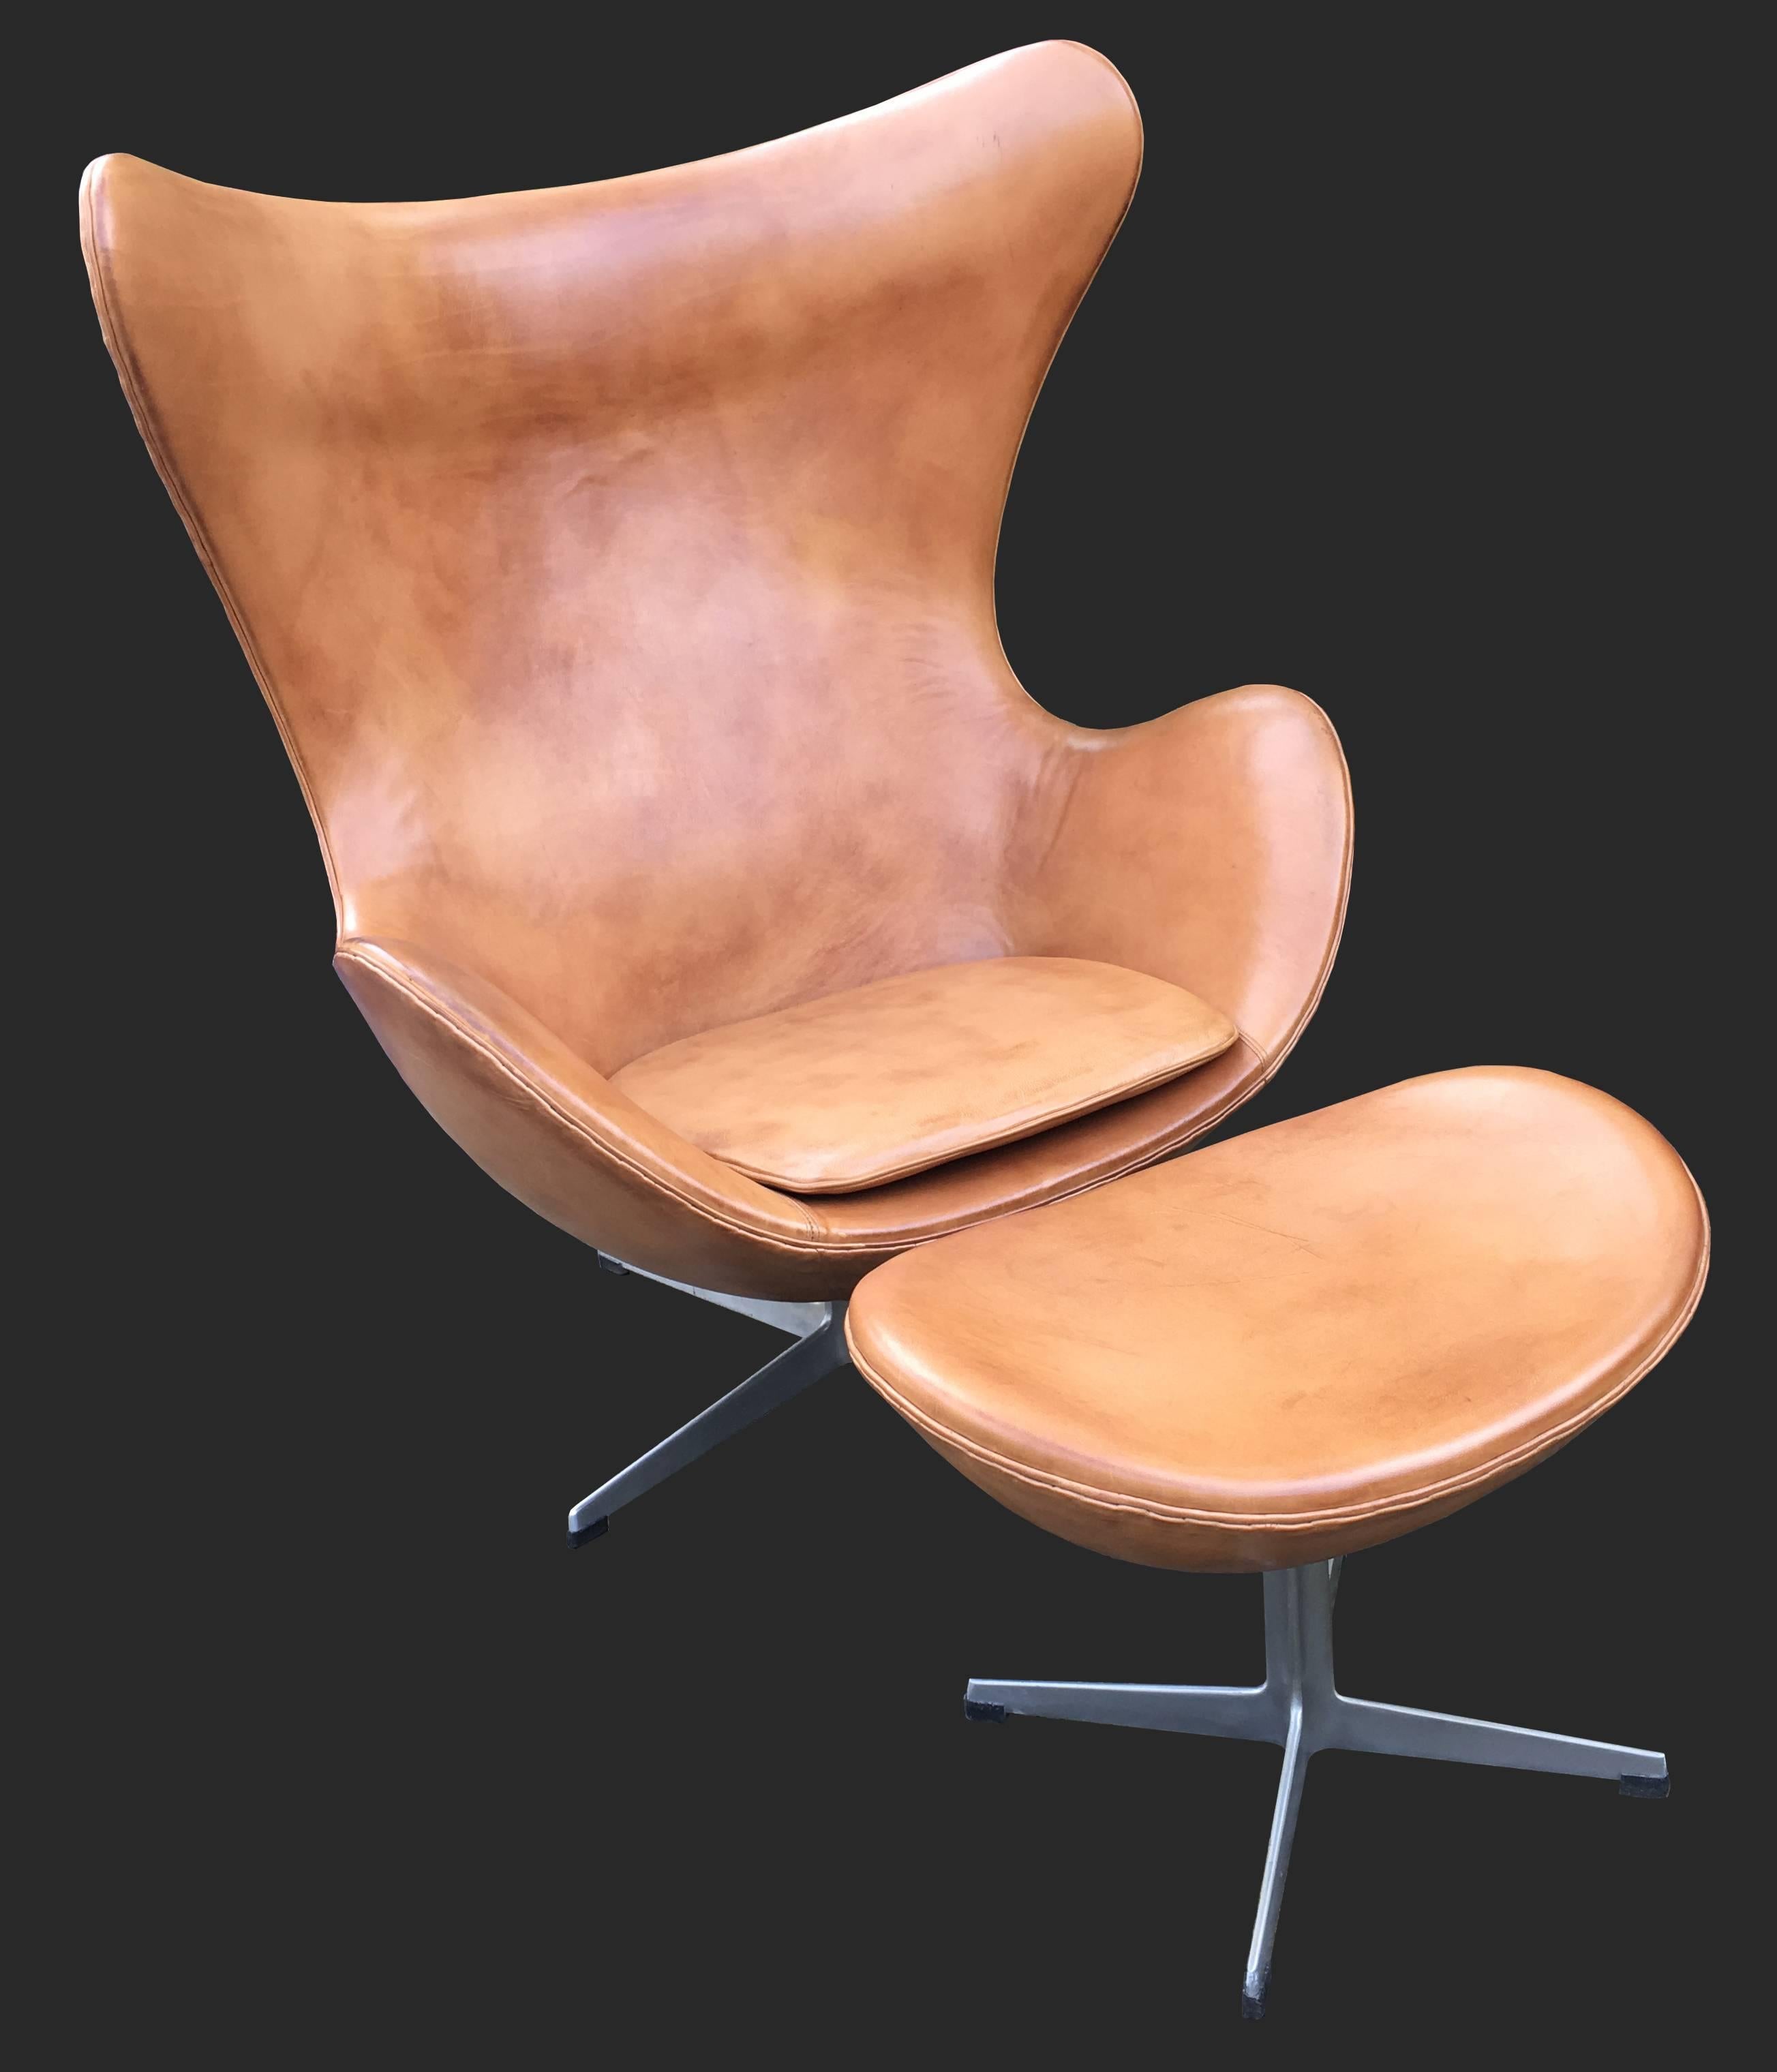 A very nice example, in great condition, leather has no holes or tears and foam is still soft and not crumbling, overall a very cool comfortable example of this ultra Classic piece of Scandinavian Modern furniture.

 